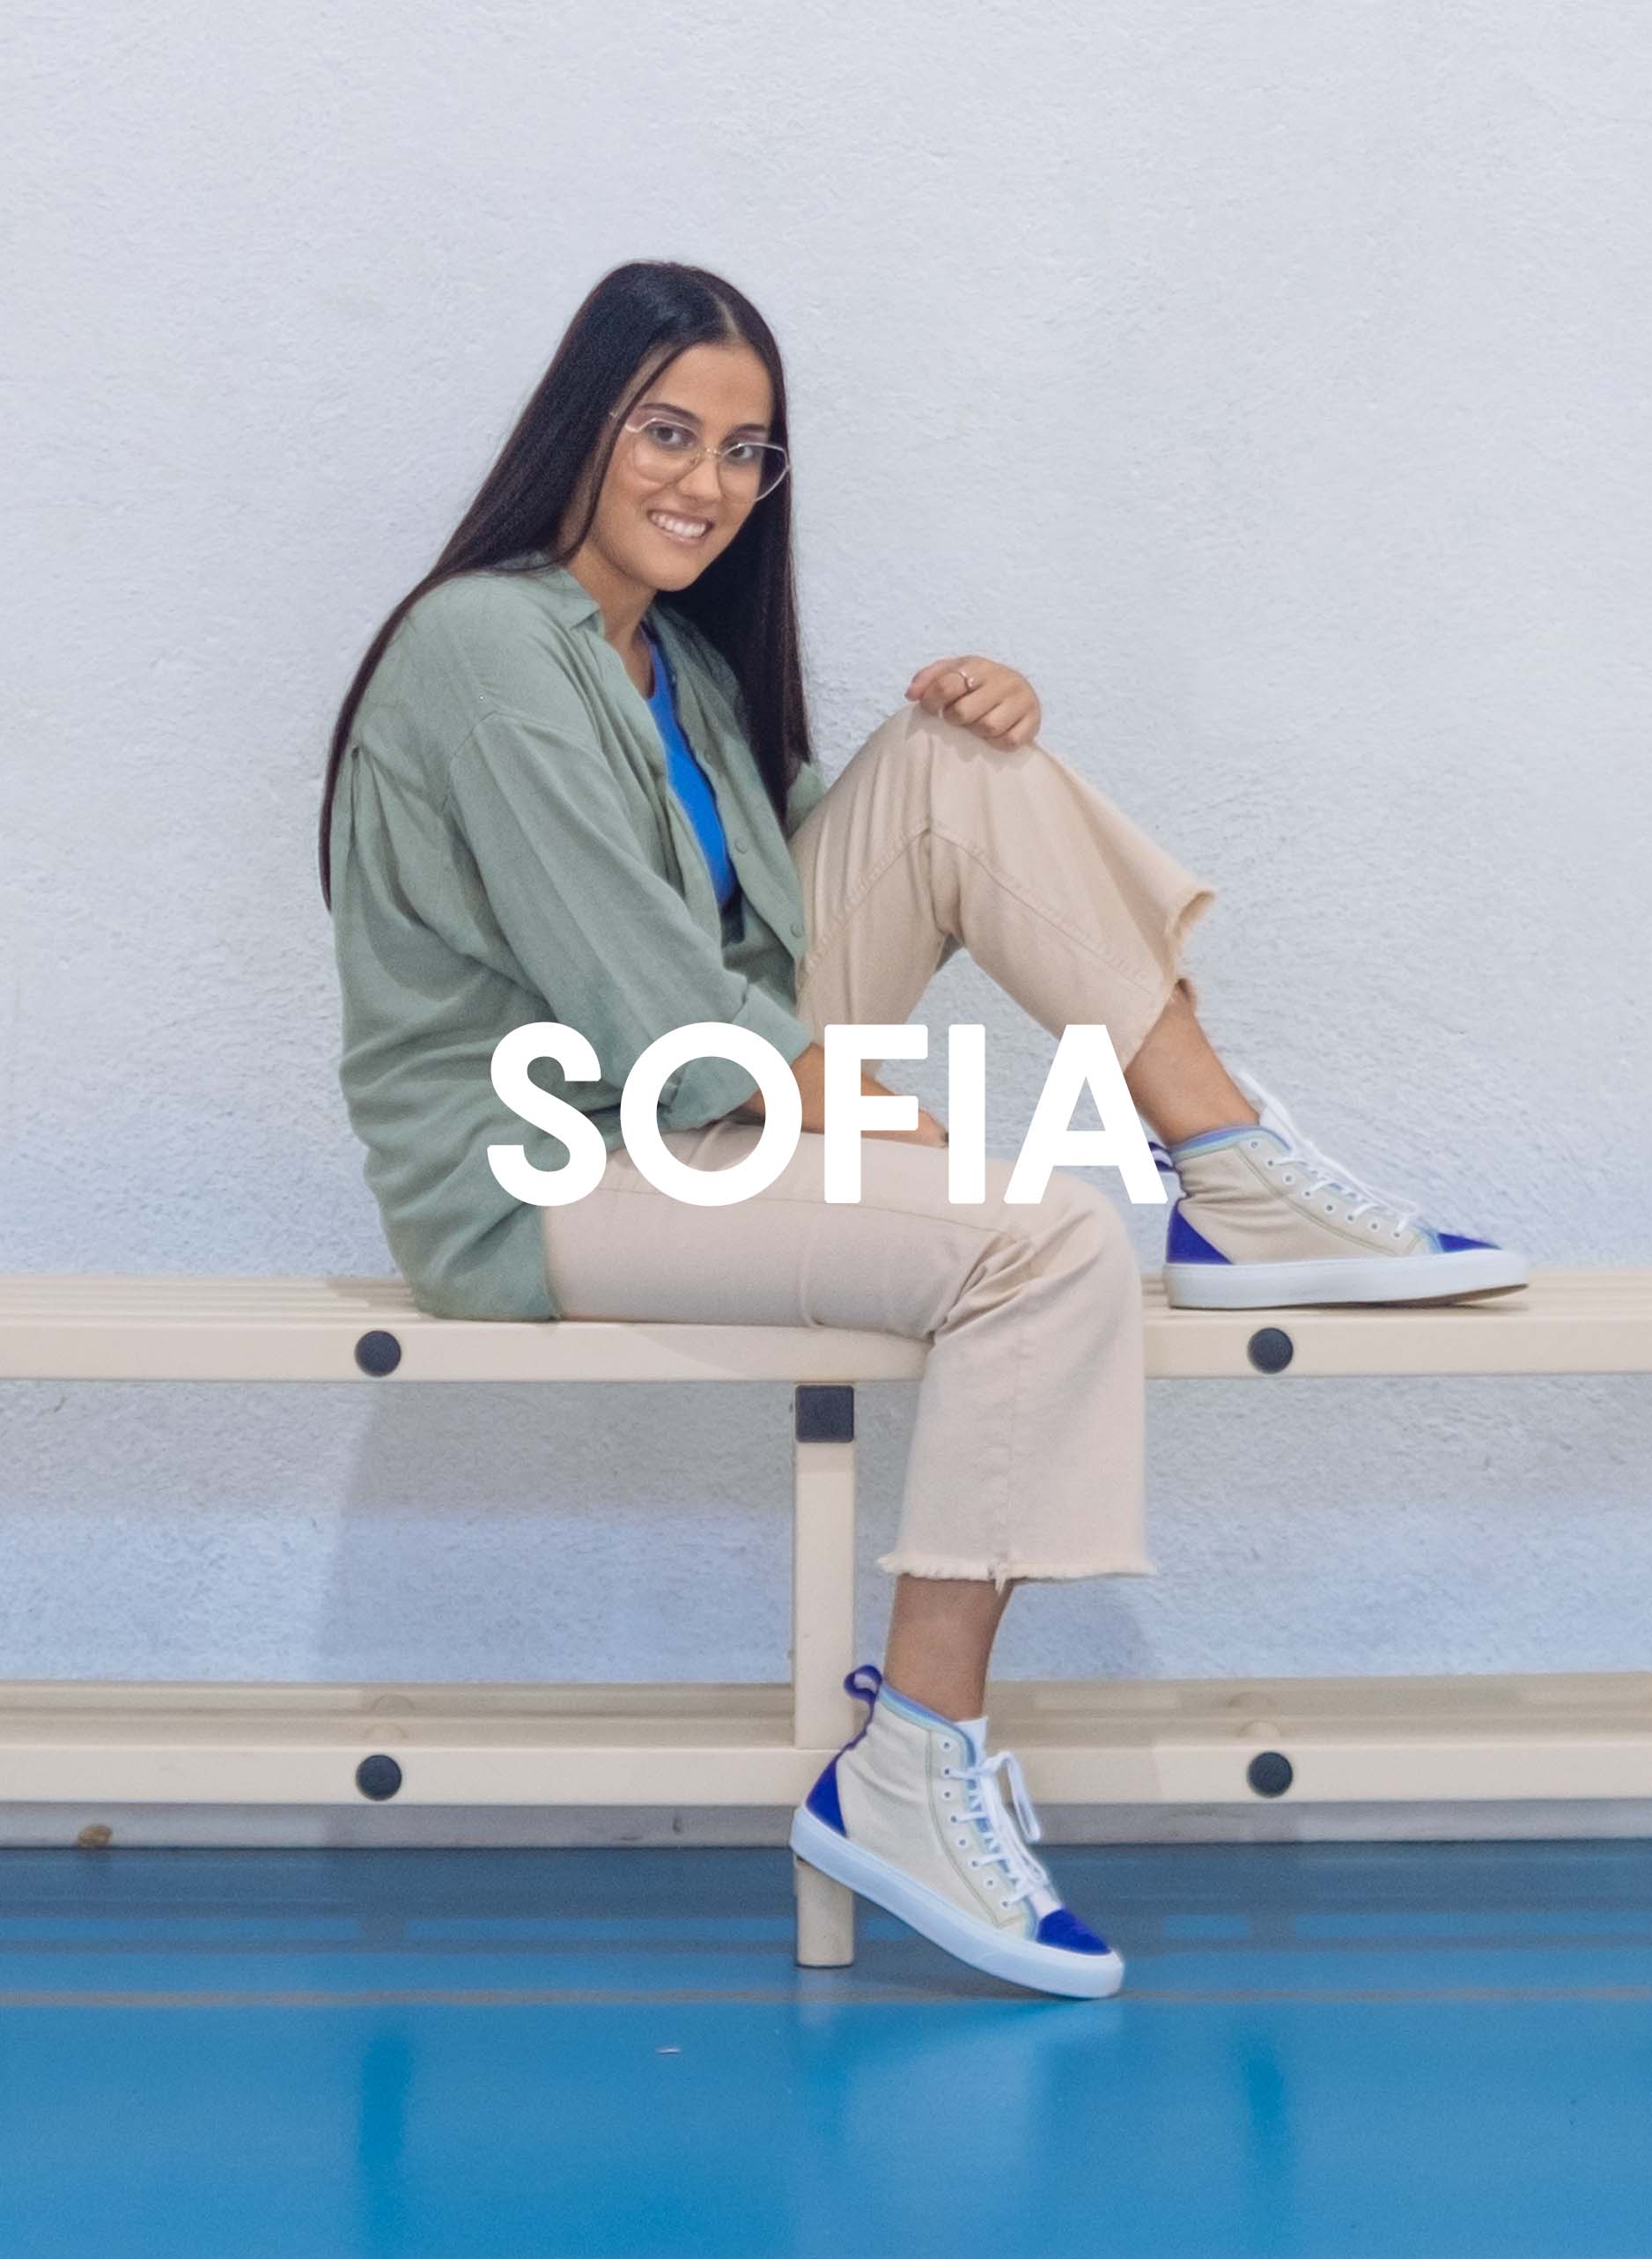 Sofia wearing a green shirt and beige pants sitting on a bench with Diverge sneakers, promoting social impact and custom shoes throught the imagine project.